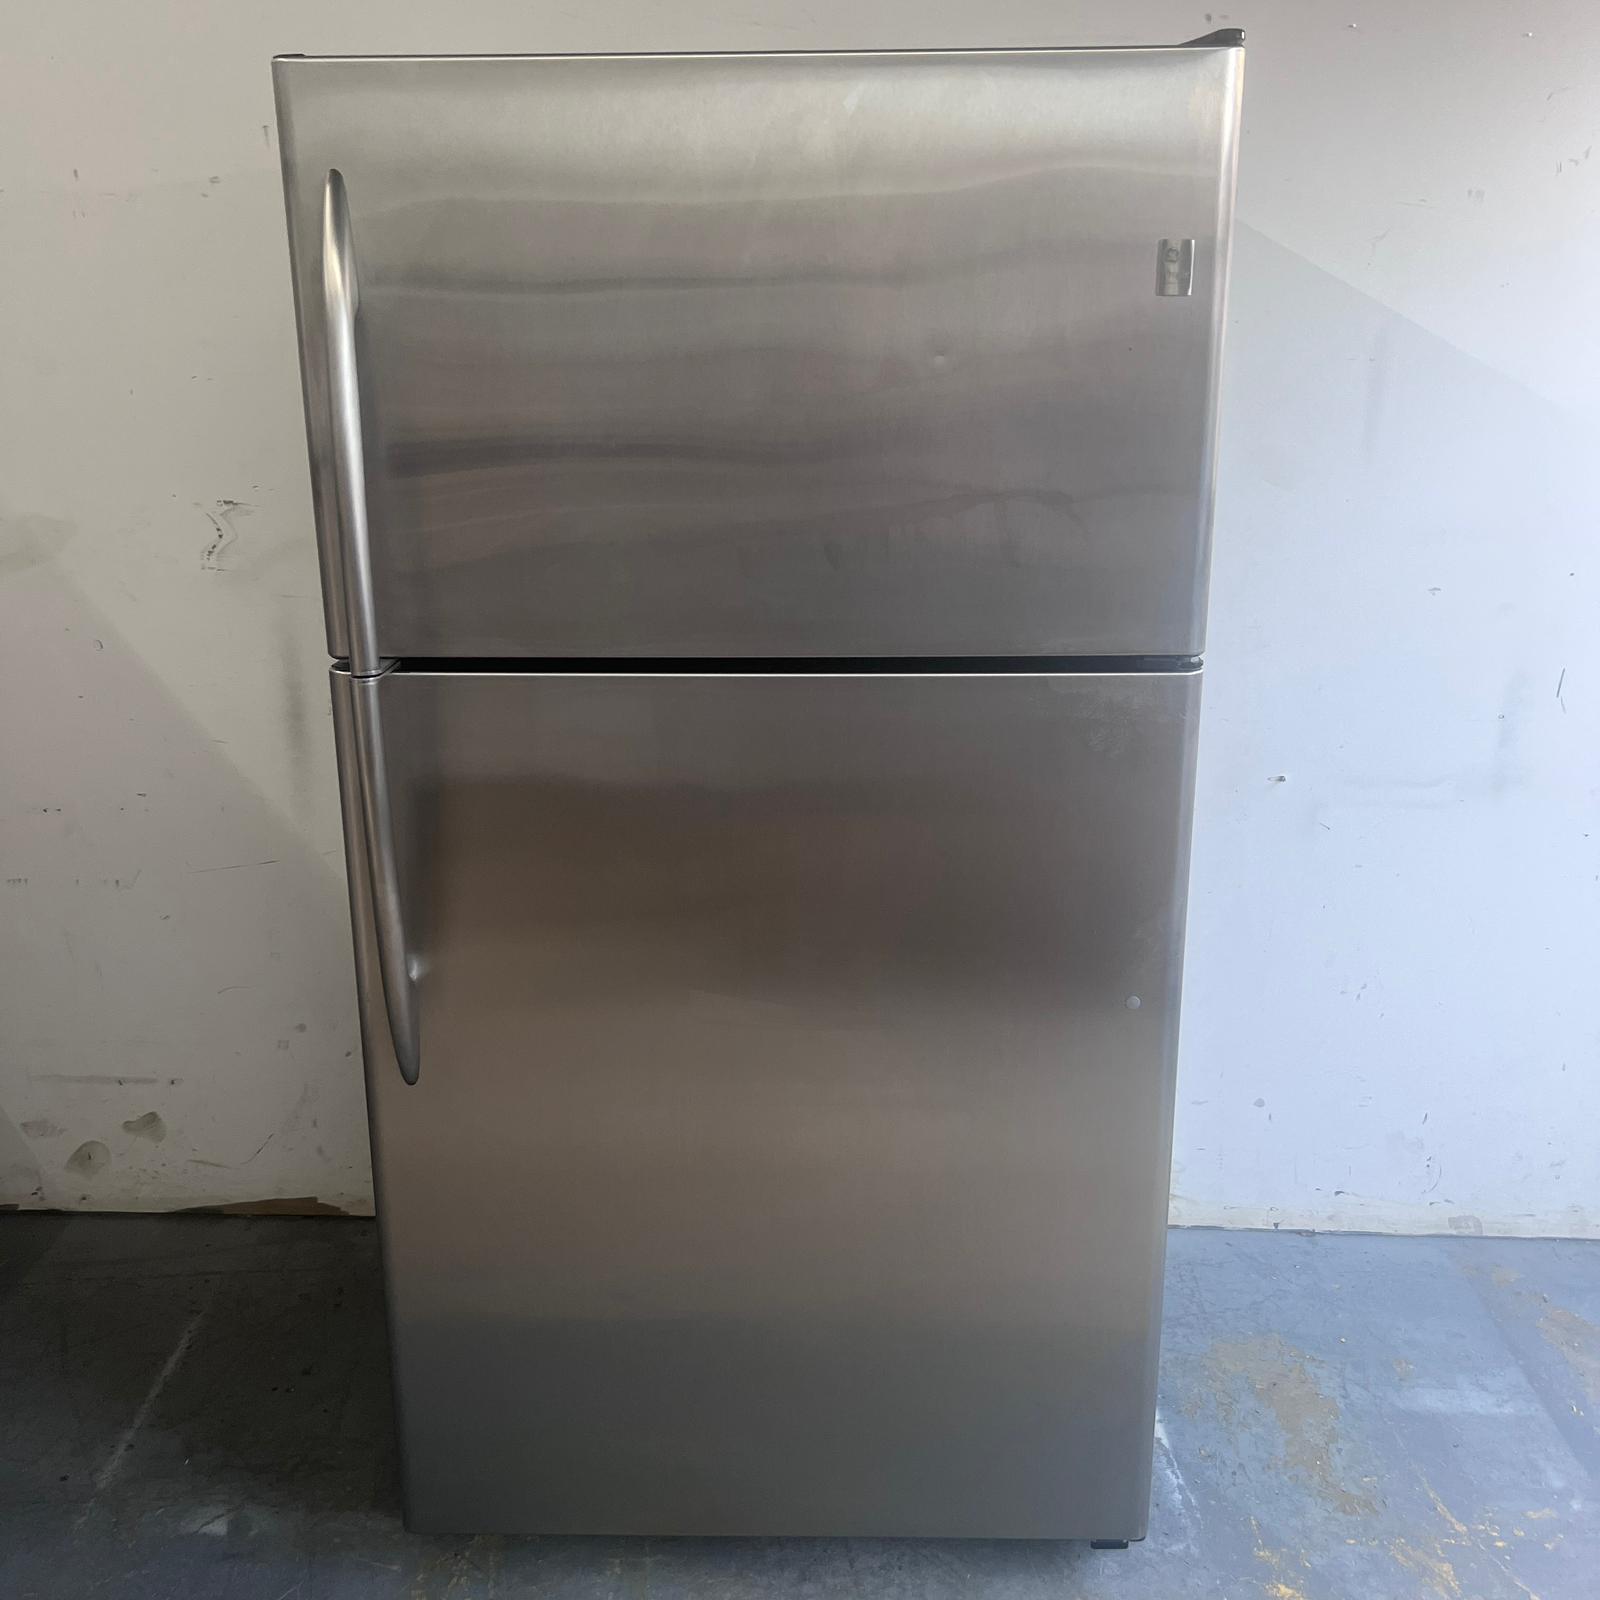 GE-Profile-stainless-Steel-Top-and-Bottom-Refrigerator